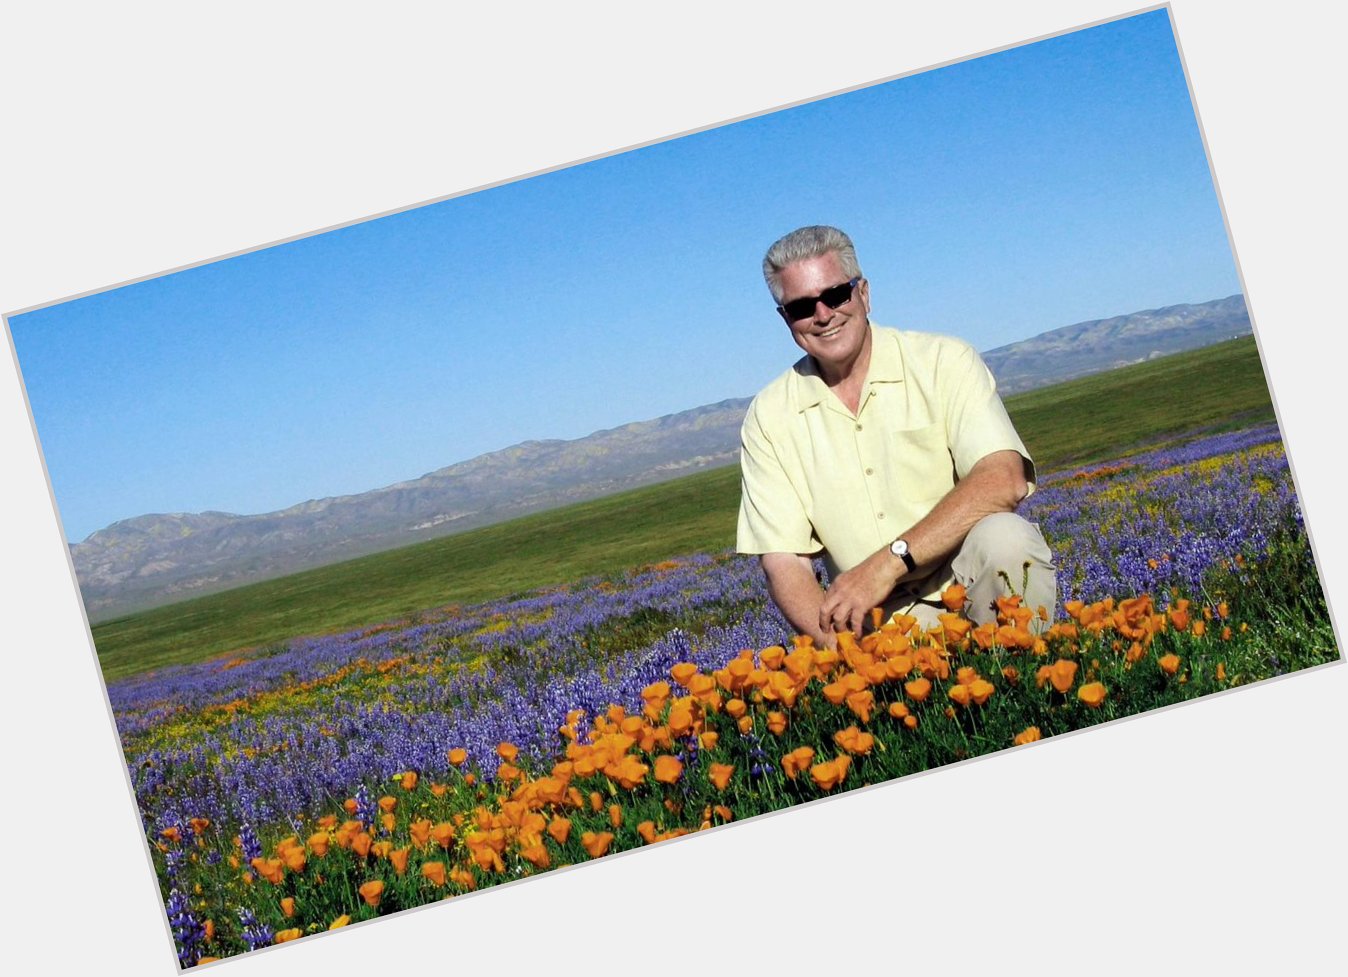 Happy birthday to a true California legend, Huell Howser. You are forever missed 